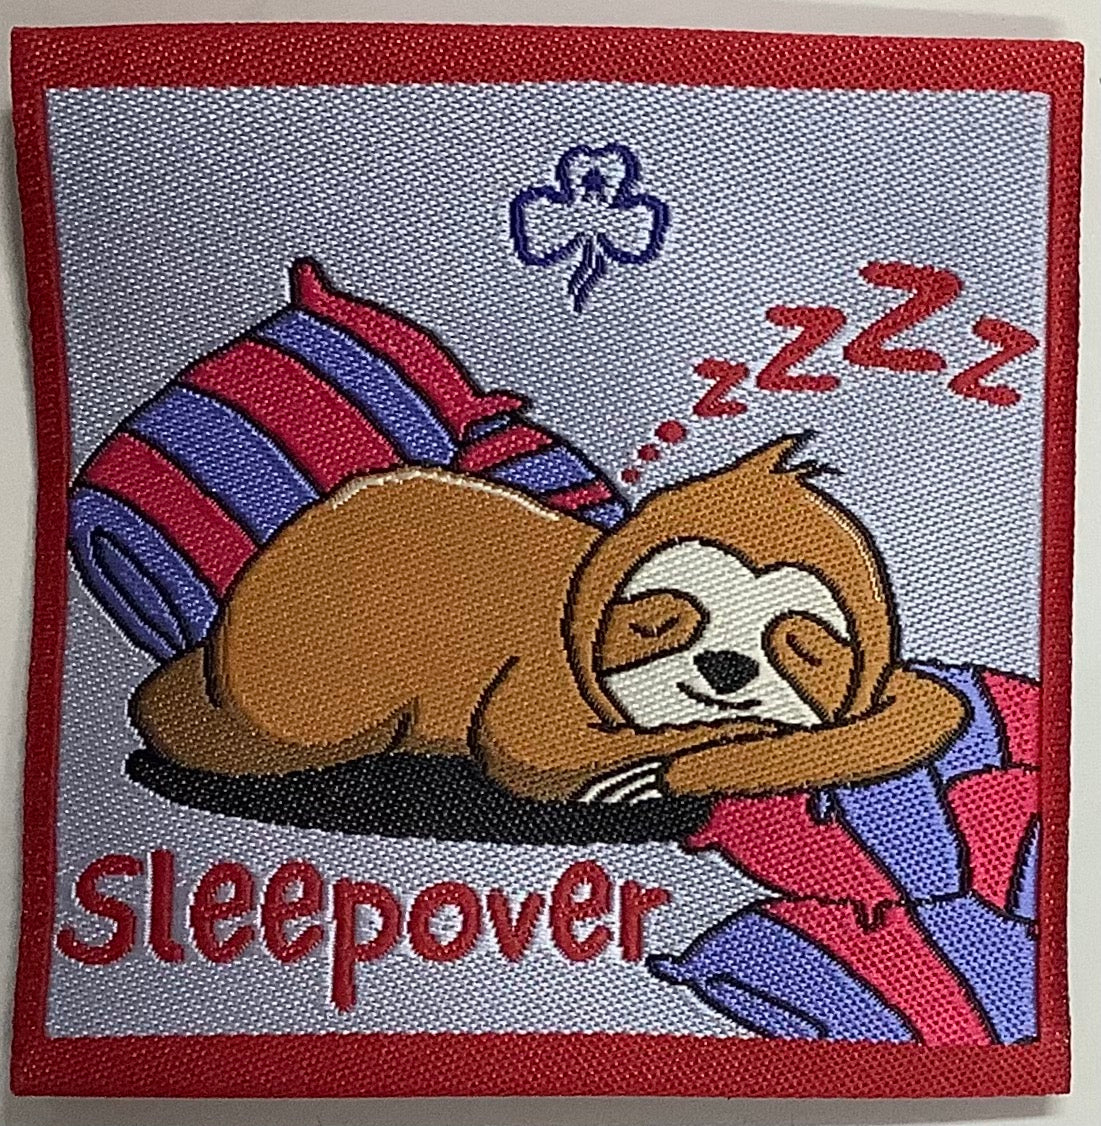 a square unbound badge with a sloth and a sleeping bag